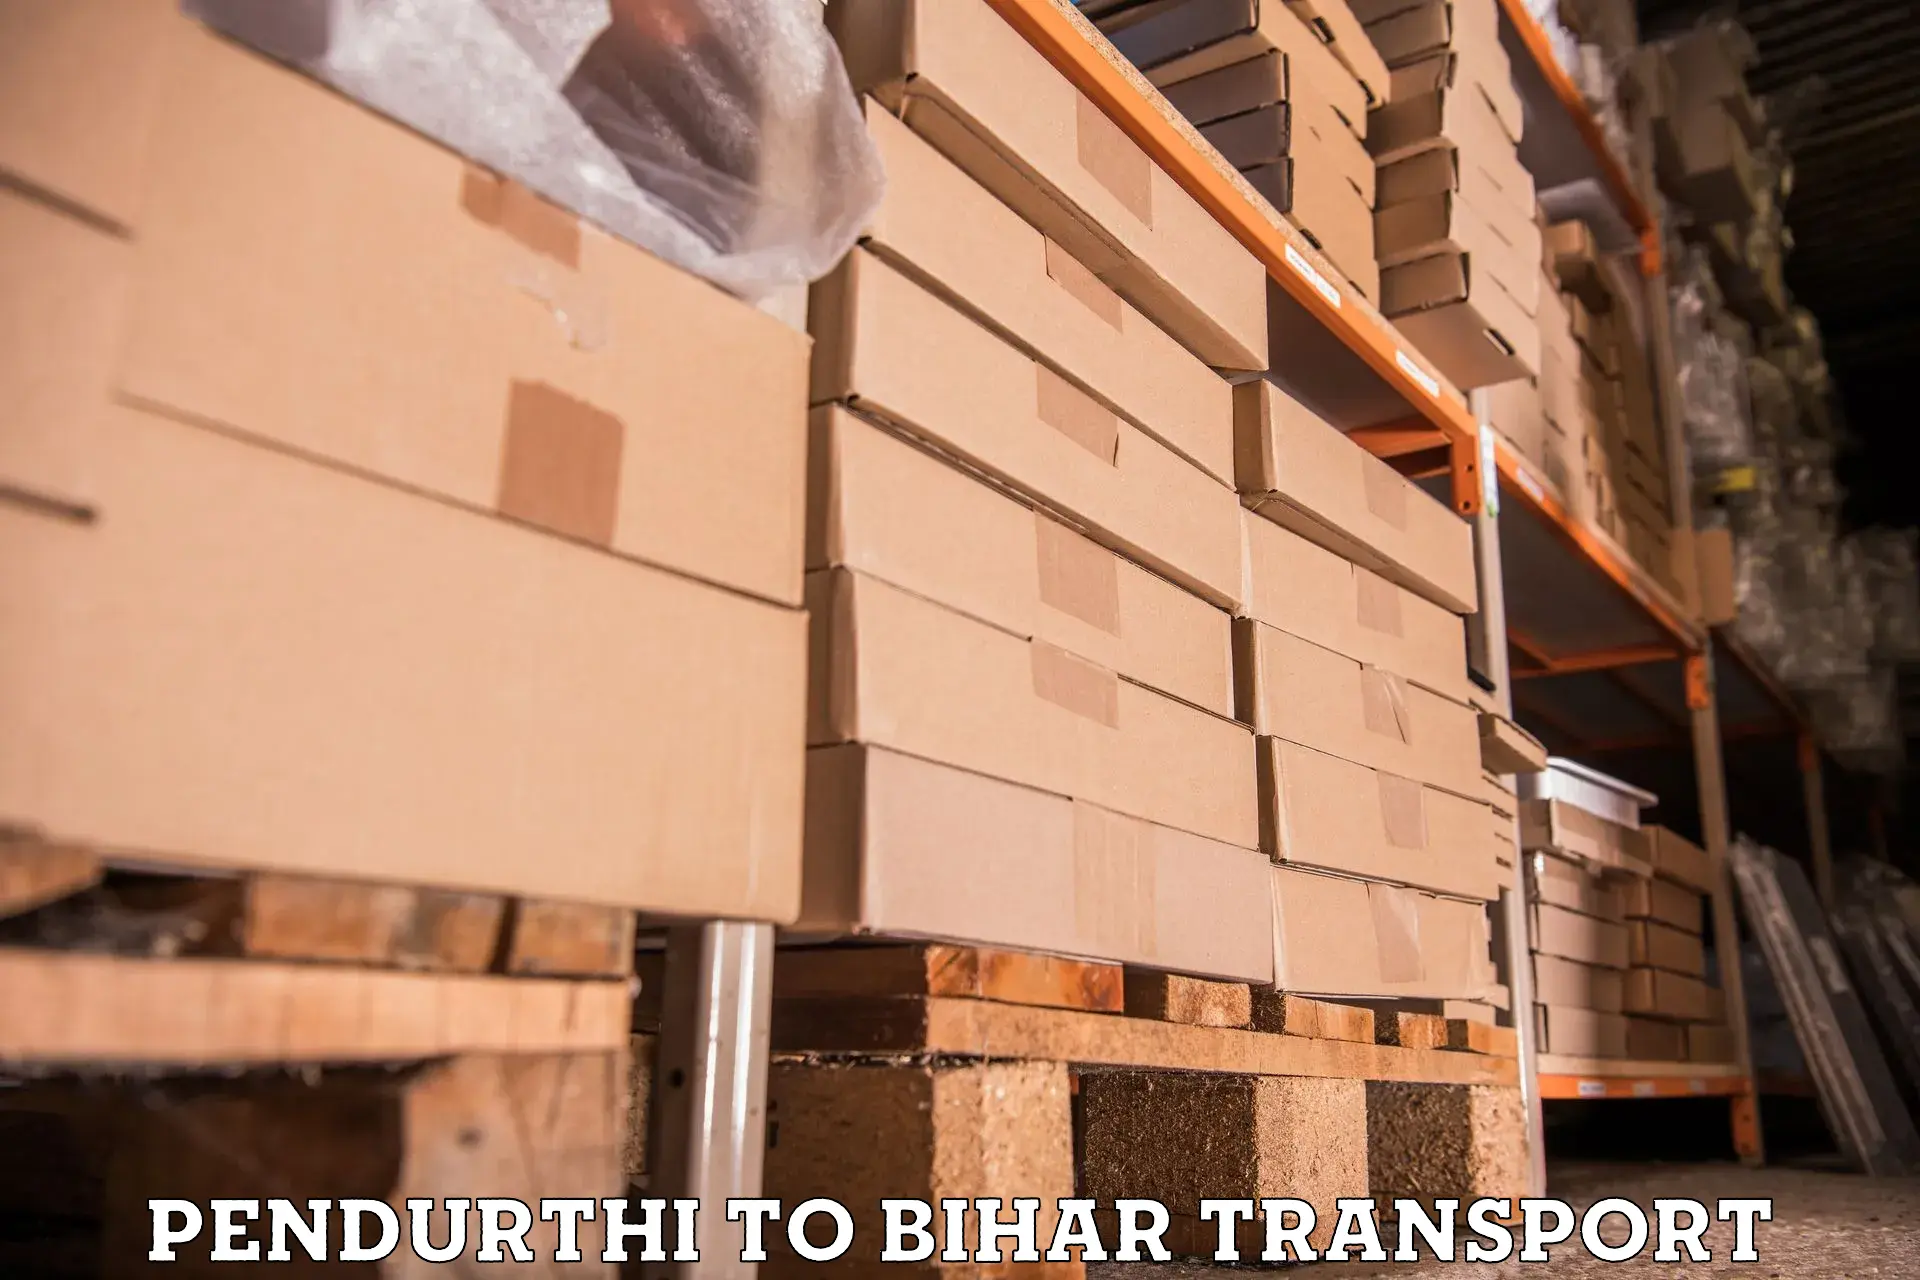 Part load transport service in India Pendurthi to Bankipore